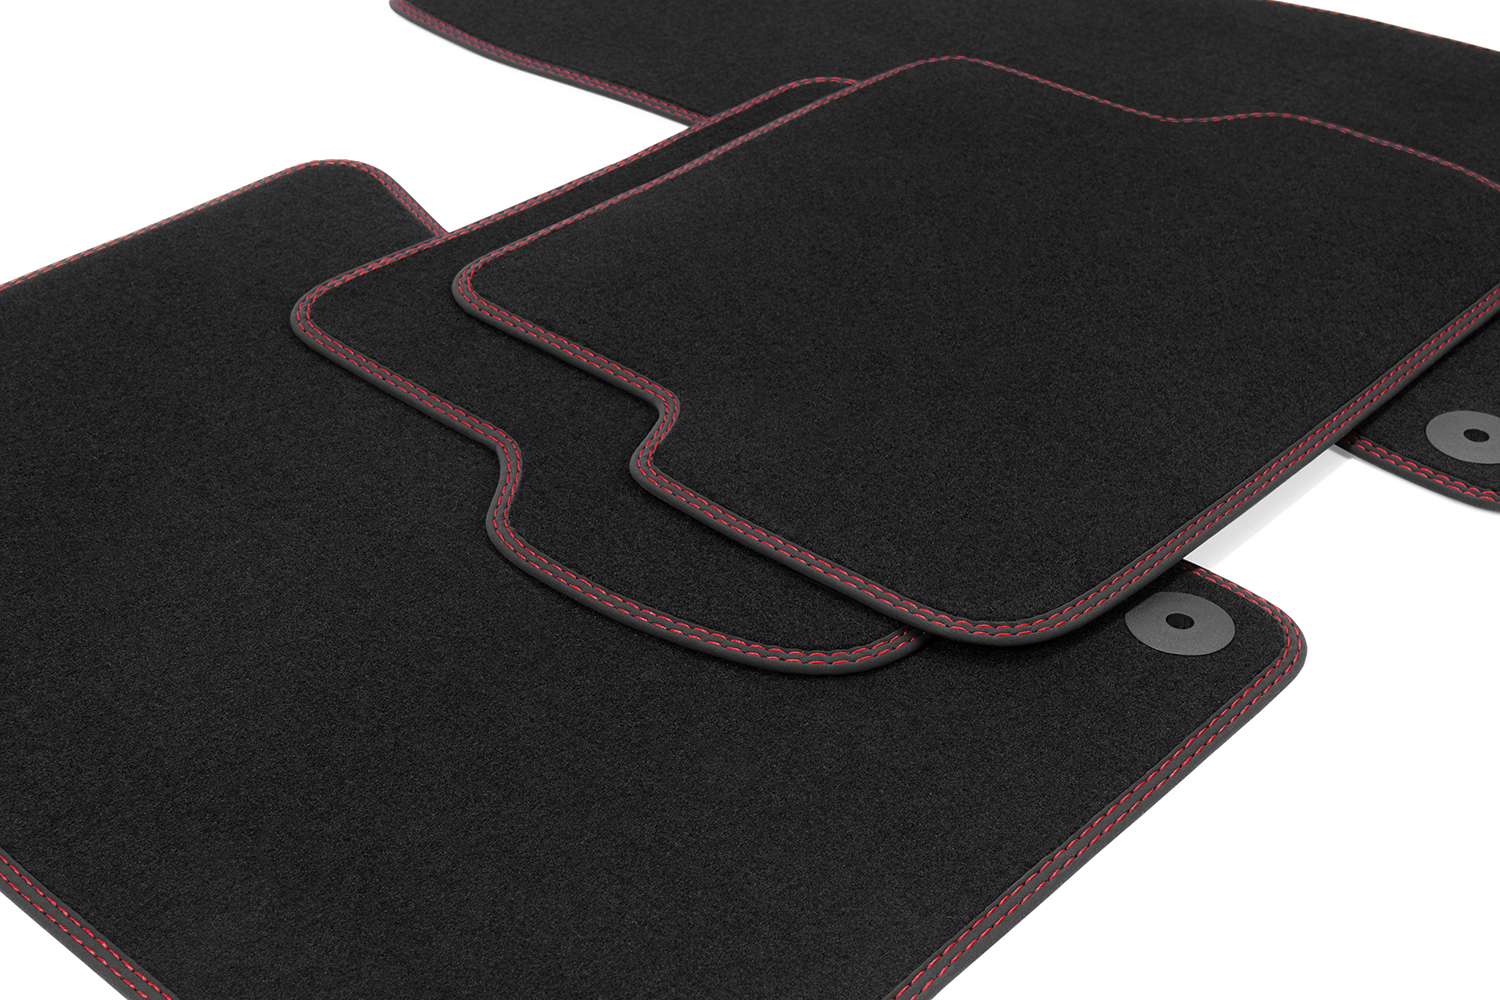 Premium Double Stitching Floor Mats For Jaguar Xj From 03 2003 11